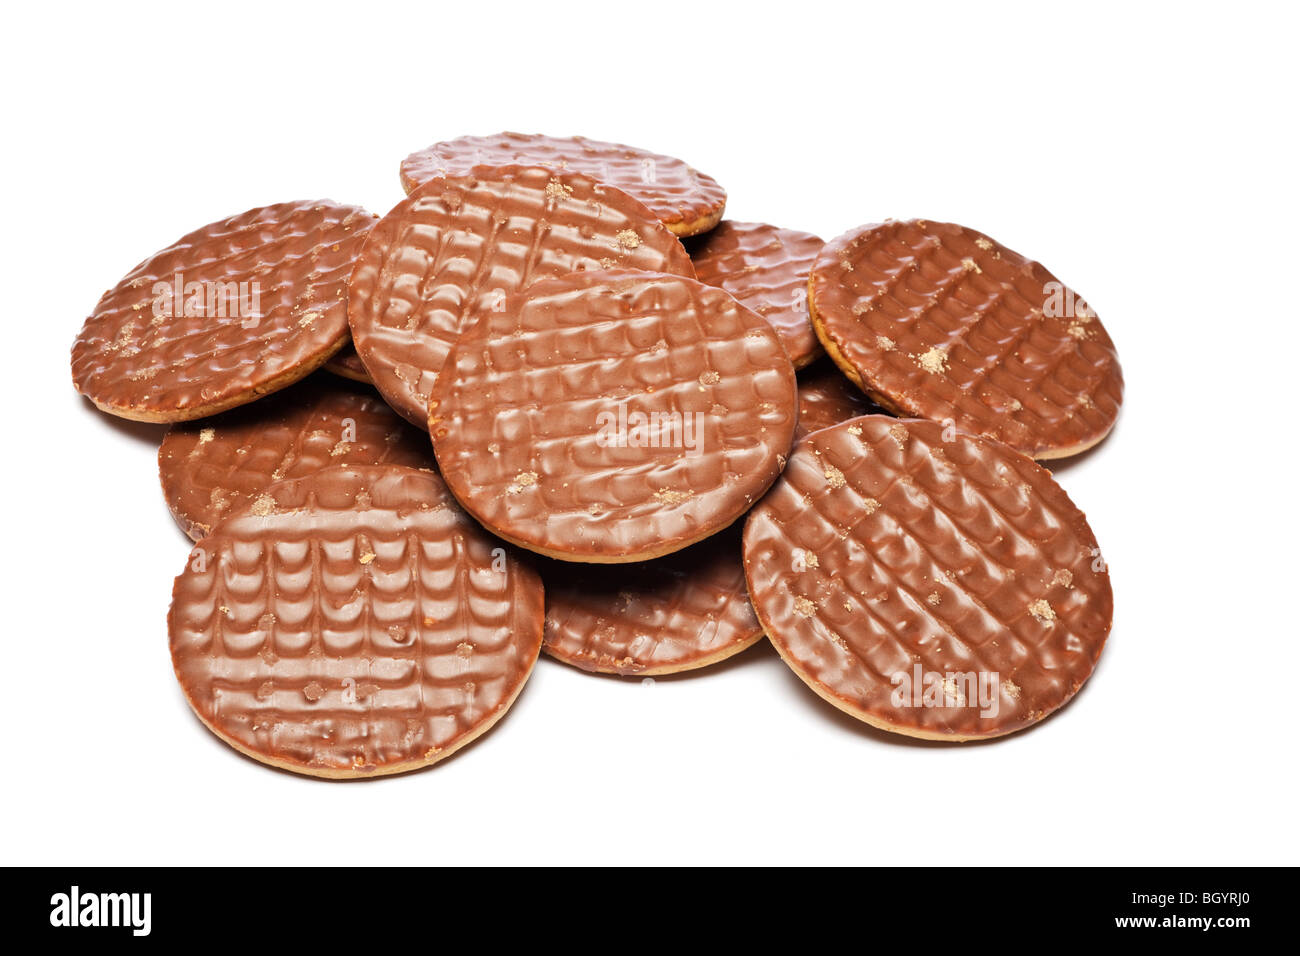 Milk chocolate digestive biscuits pile Stock Photo